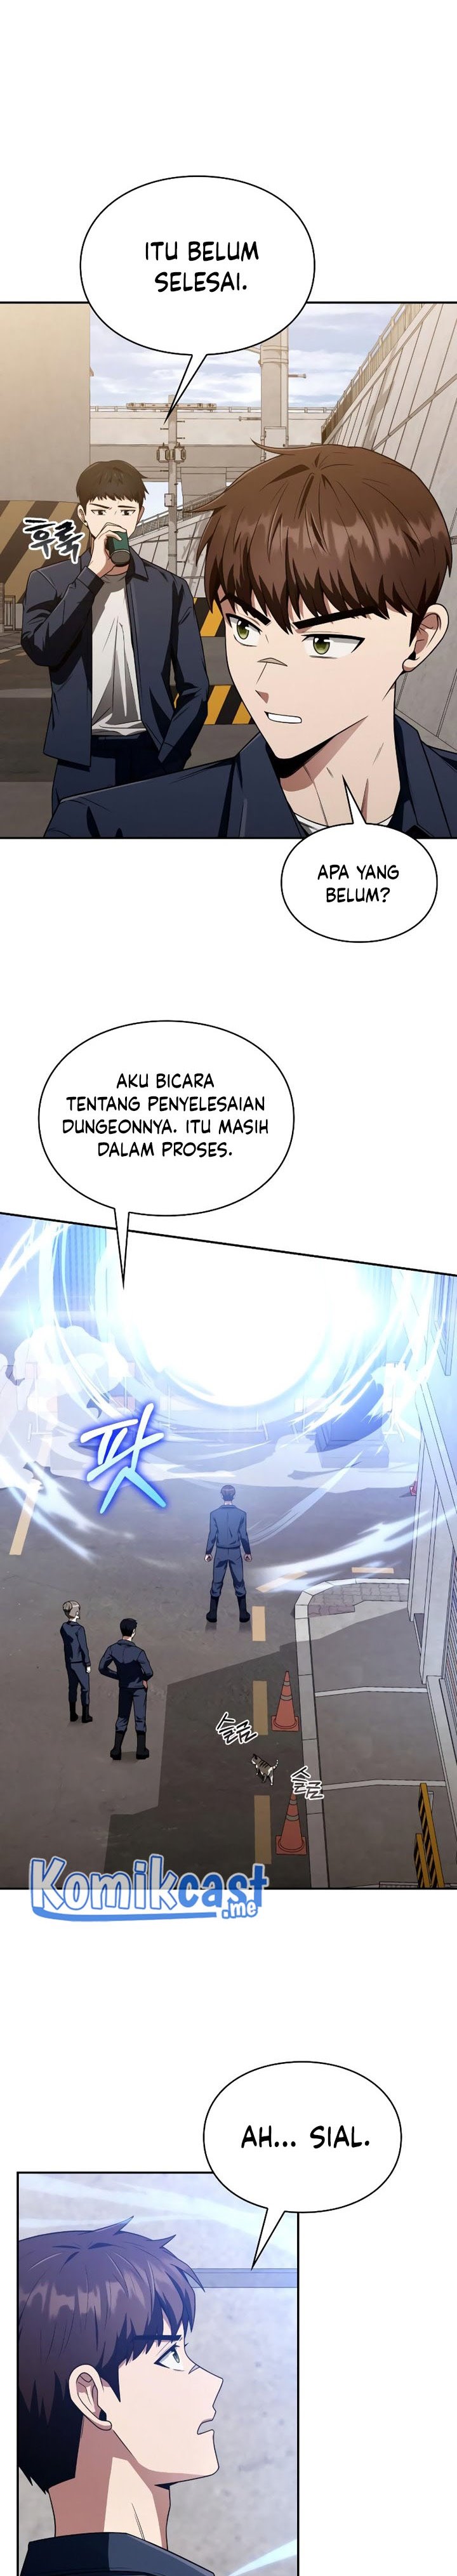 Dilarang COPAS - situs resmi www.mangacanblog.com - Komik clever cleaning life of the returned genius hunter 005 - chapter 5 6 Indonesia clever cleaning life of the returned genius hunter 005 - chapter 5 Terbaru 13|Baca Manga Komik Indonesia|Mangacan